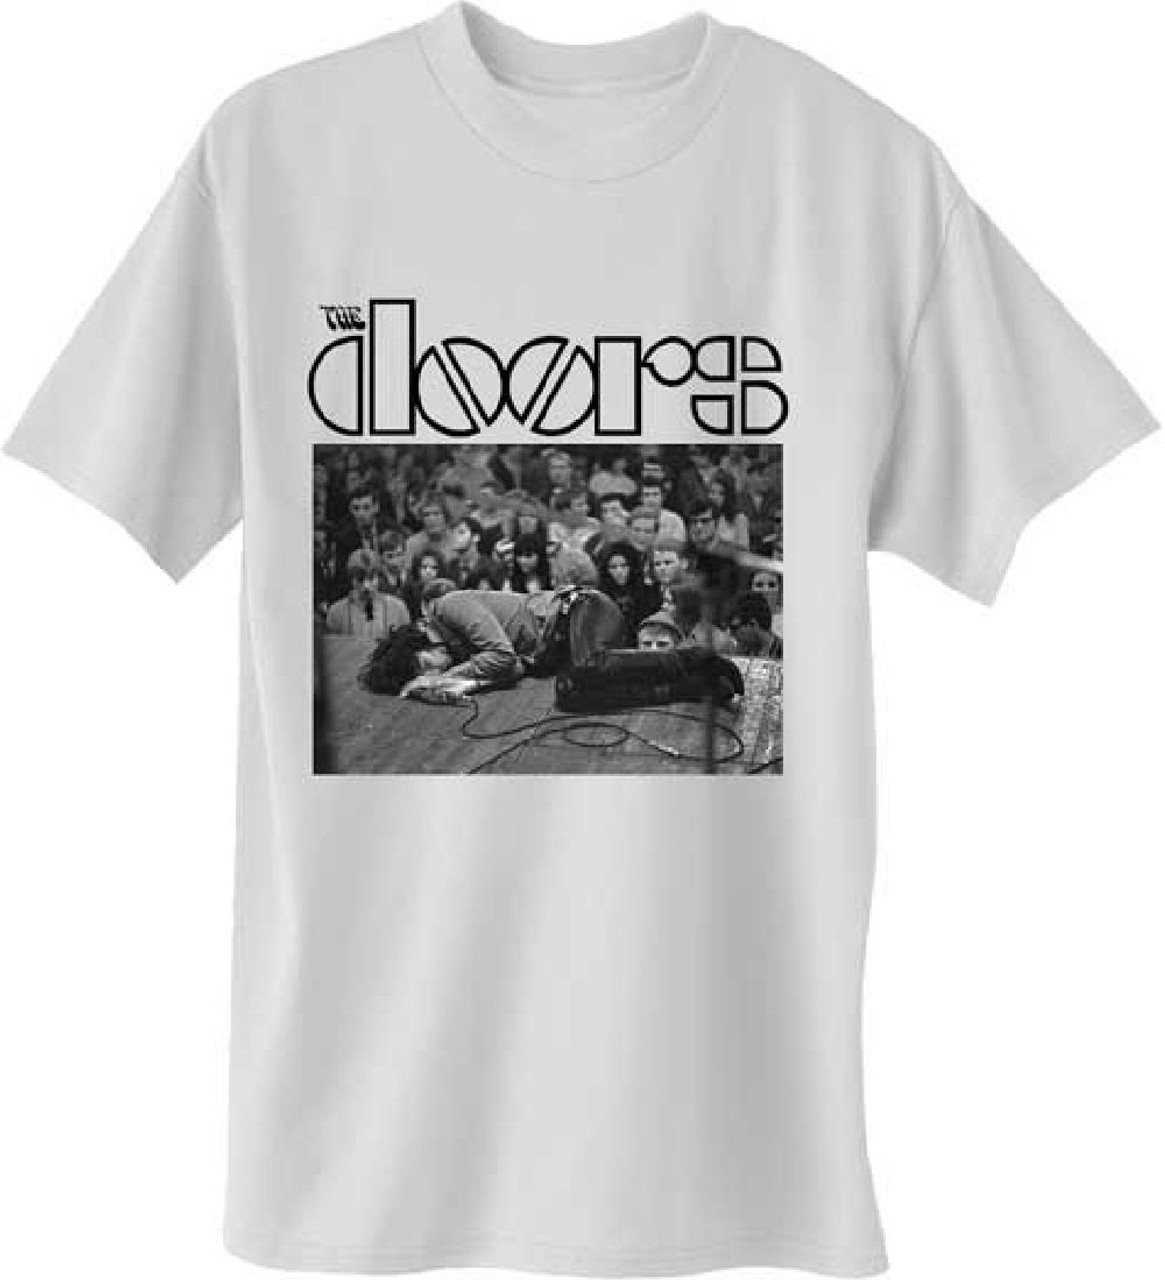 The Doors T-shirt - Jim Morrison Collapsed on Stage Classic Photo